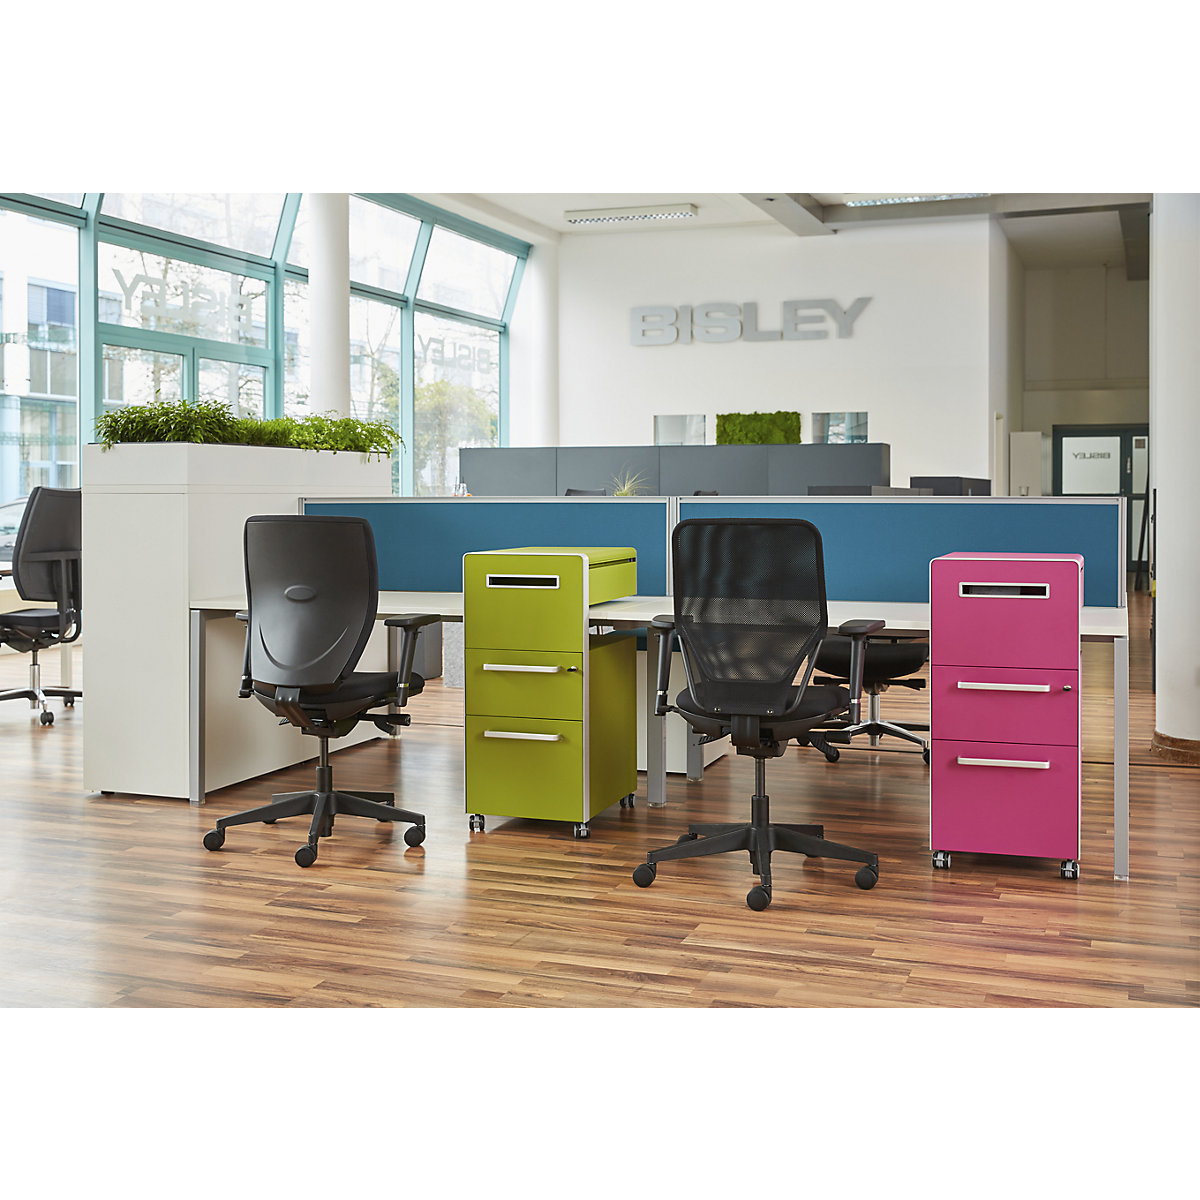 Bite™ pedestal furniture, with 1 pin board, opens on the left side – BISLEY (Product illustration 3)-2